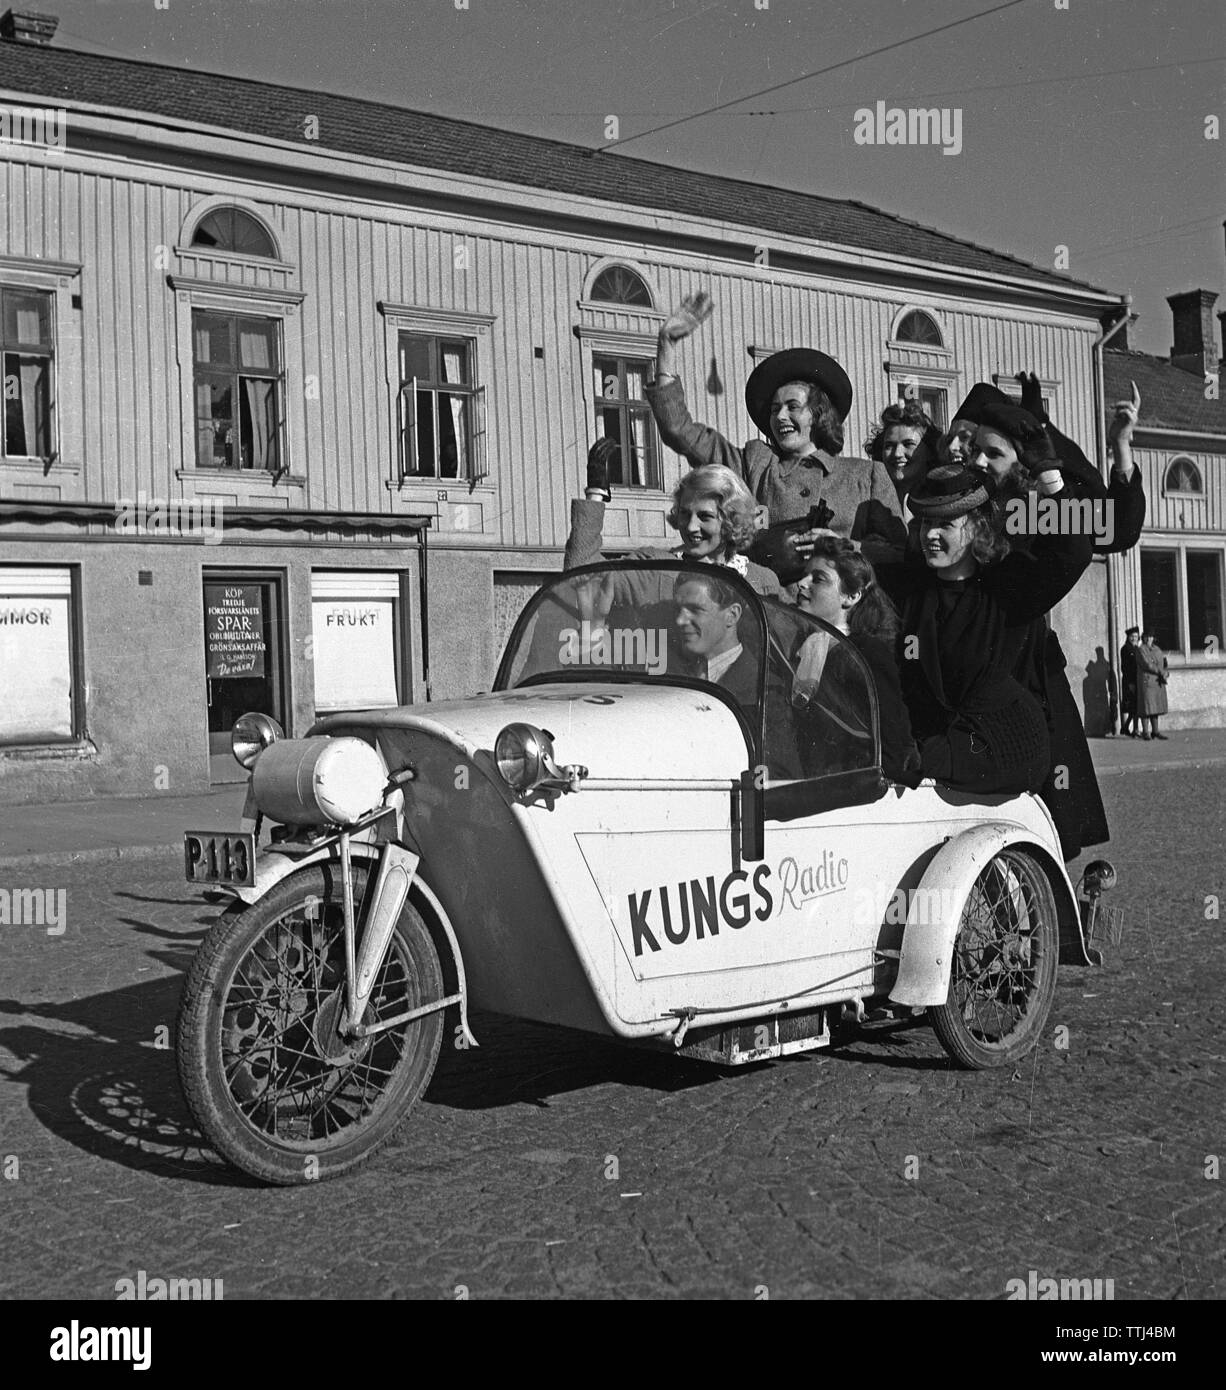 Driving in the 1940s. A man drives a three wheeled motorcycle and a group of women have joined the ride. Sweden 1943 Kristoffersson Ref A41-5 Stock Photo